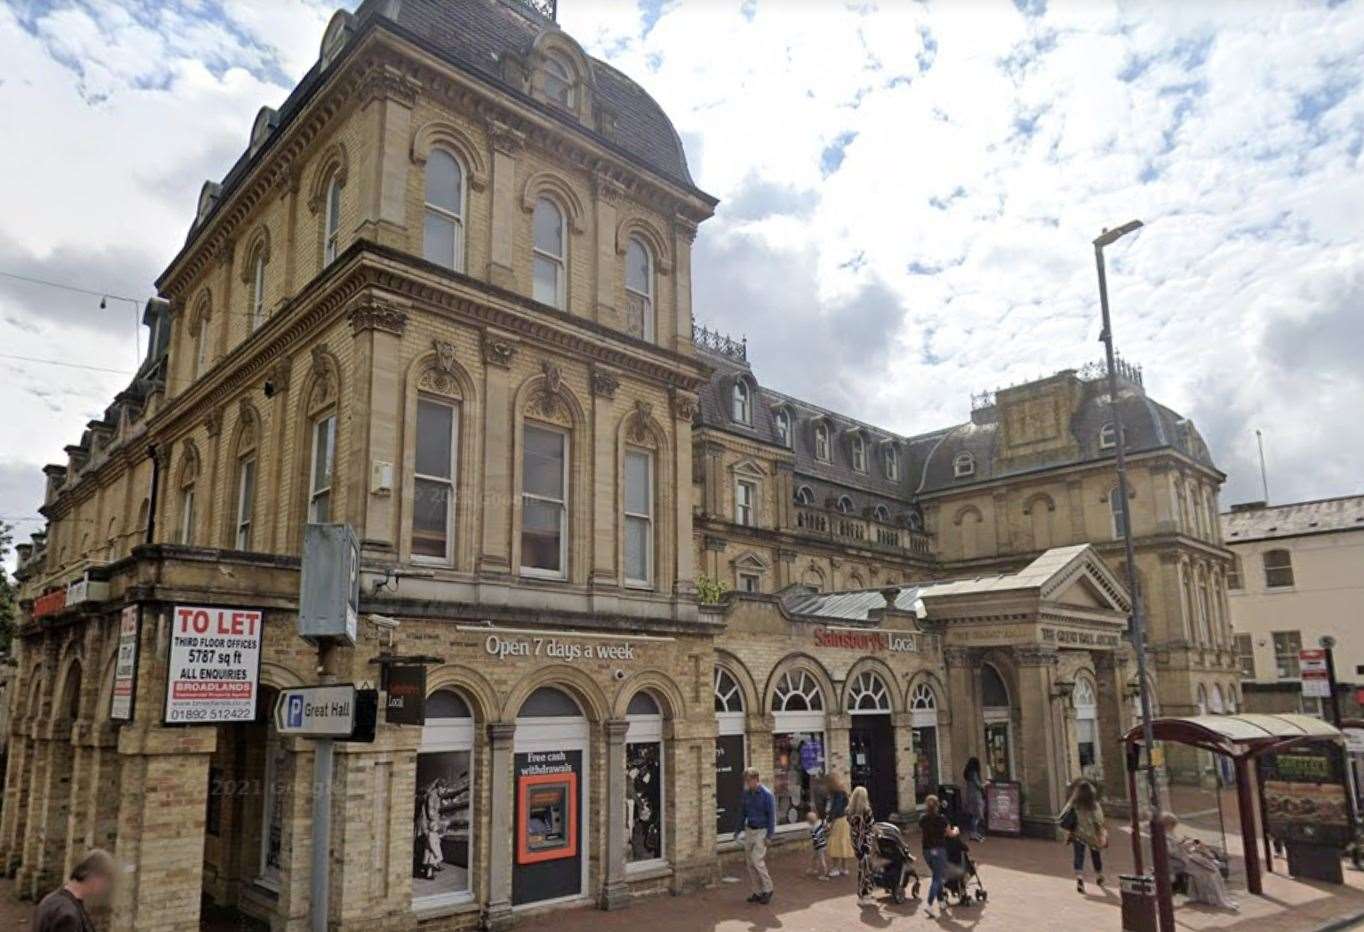 The Great Hall Arcade, which used to be Carriages, in Tunbridge Wells. Picture: Google